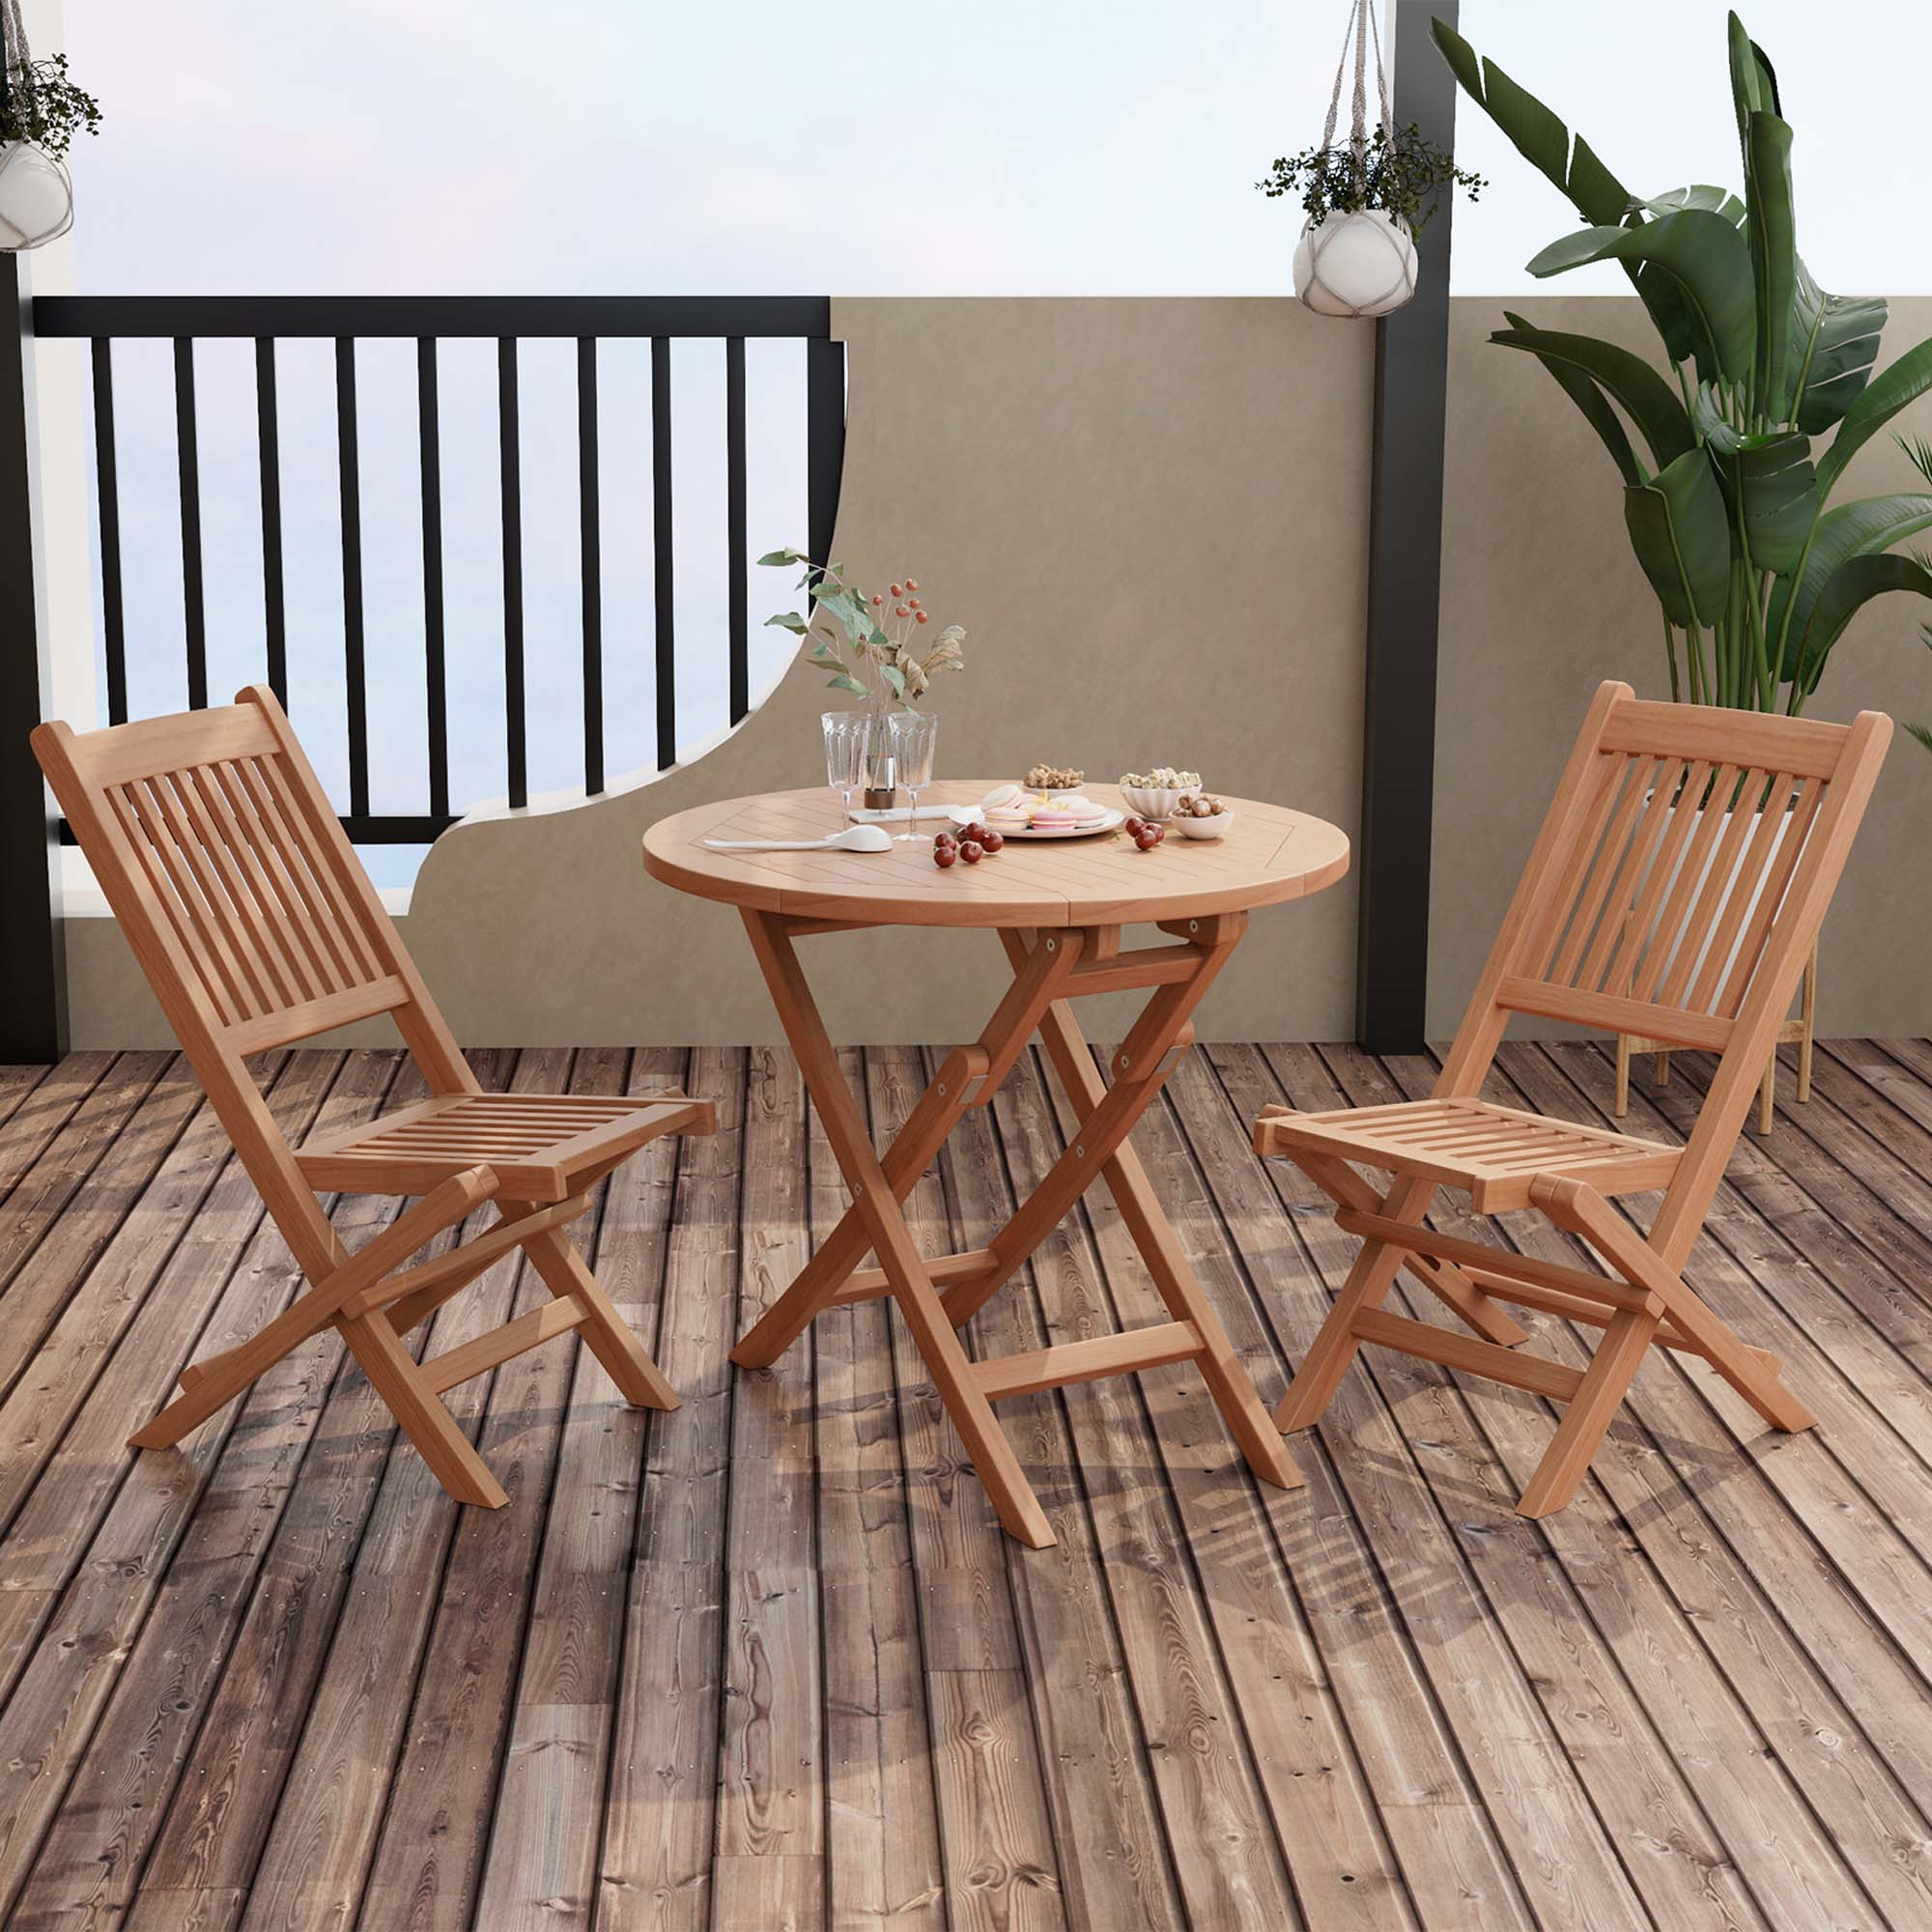 Costway 3pcs Patio Outdoor Teak Wood Bistro Dining Set Folding Chair & Table Slatted